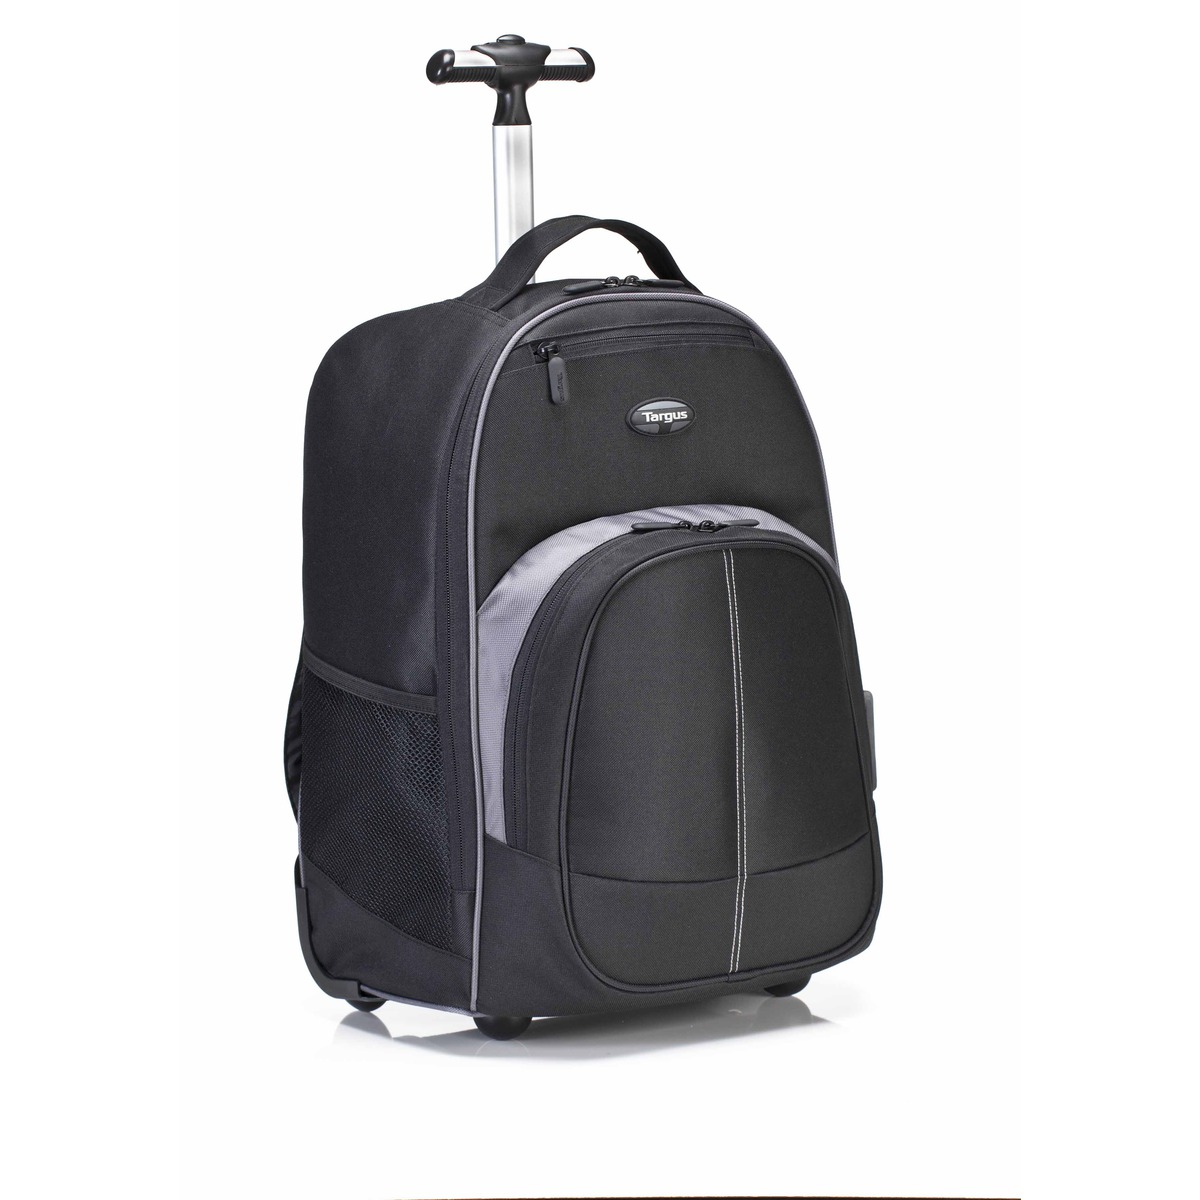 Targus 16" Compact Rolling Laptop Backpack, Black - image 1 of 10